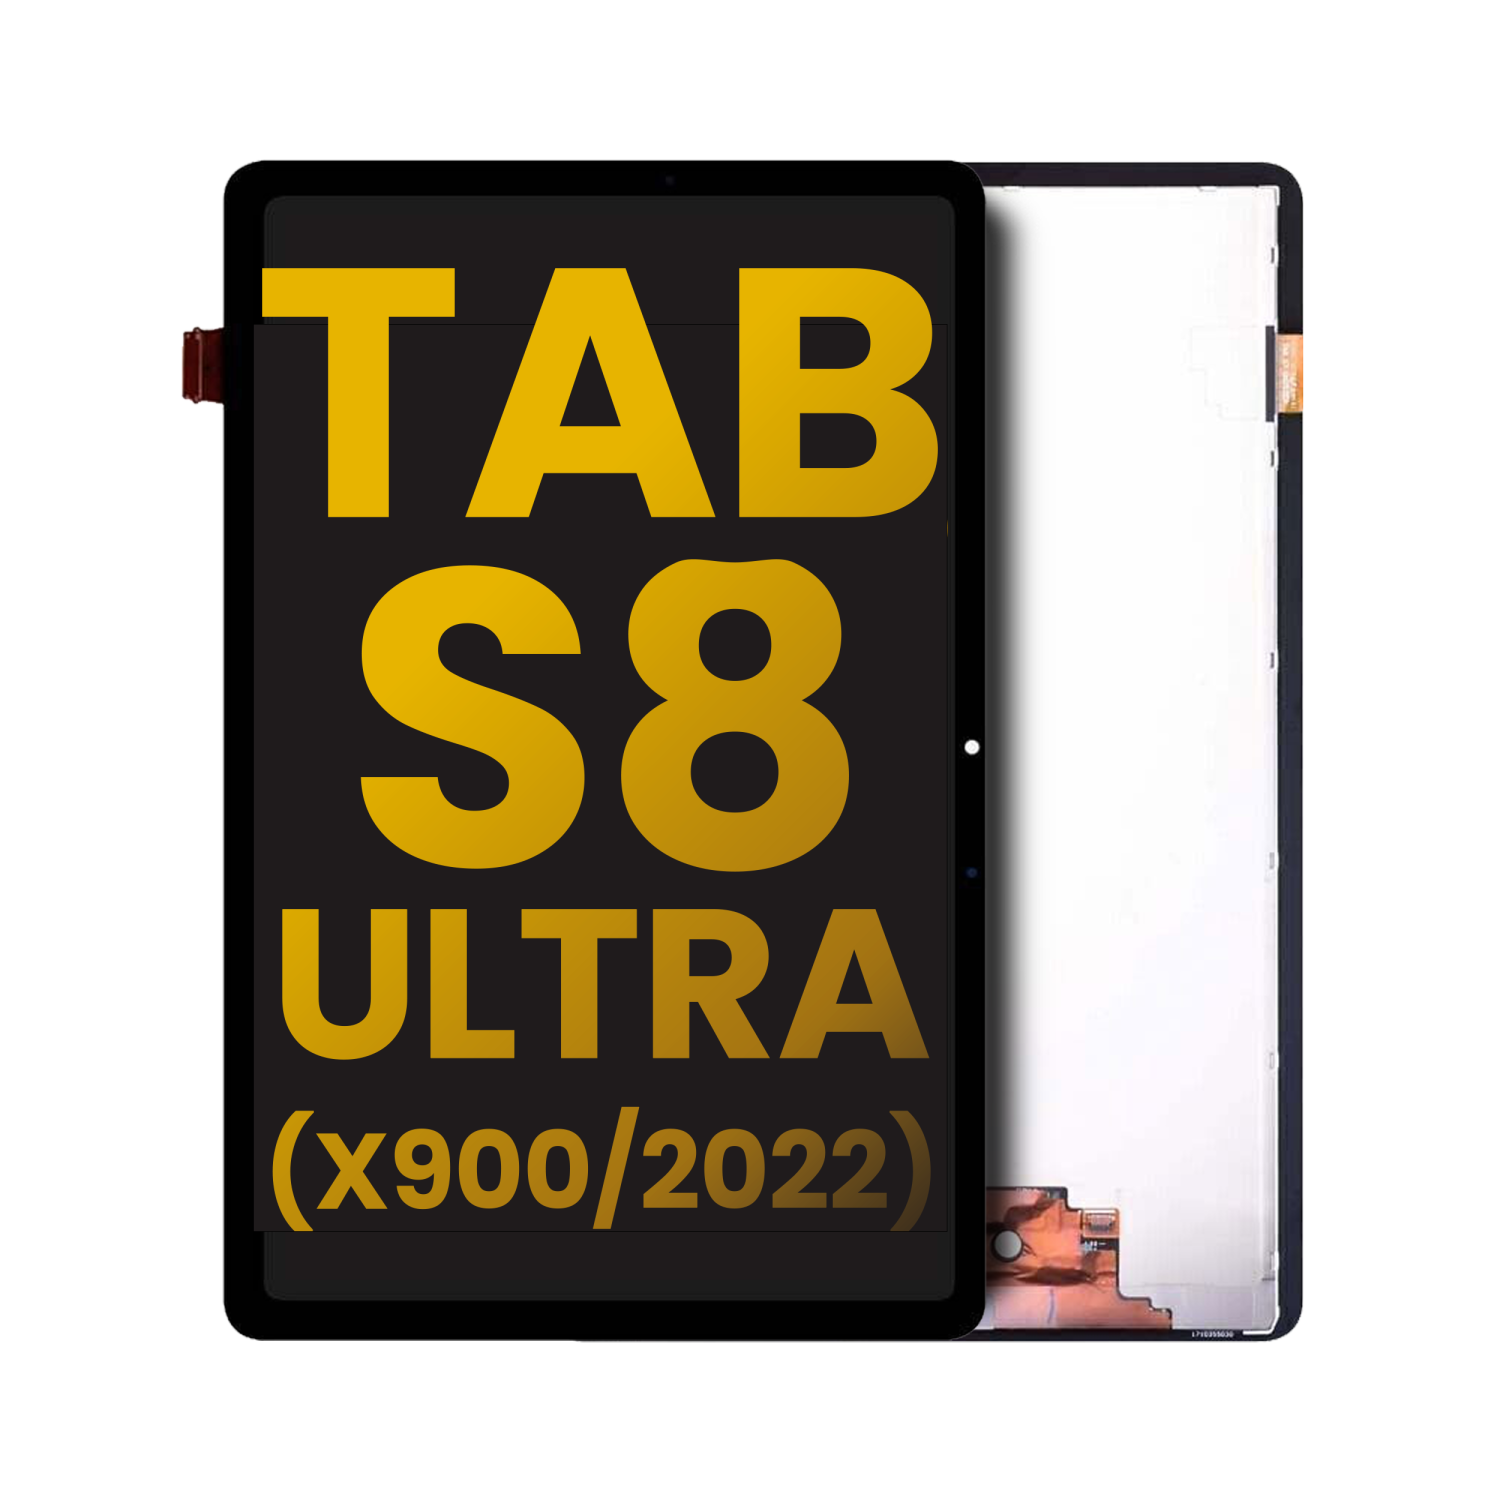 Refurbished (Excellent) - OLED Assembly Without Frame Compatible With Samsung Galaxy Tab S8 Ultra (X900 / 2022) (Black)